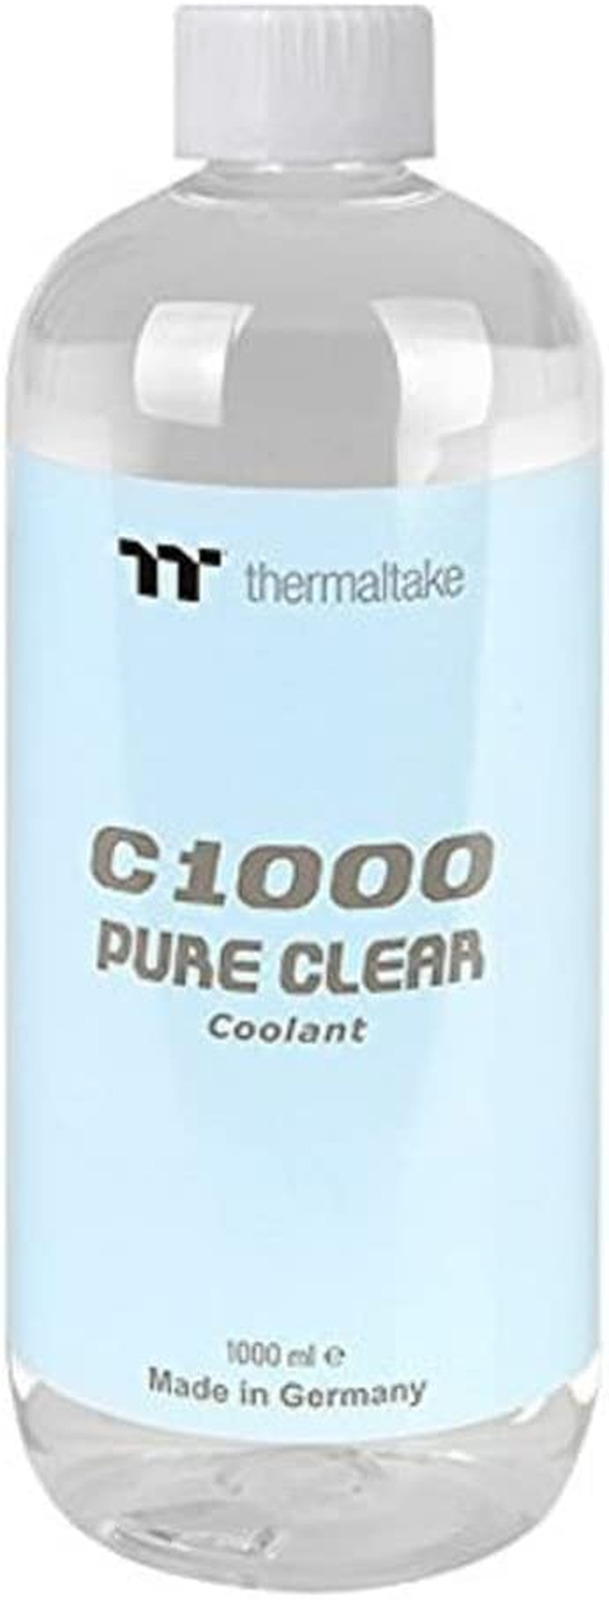 Thermaltake C1000 1000Ml Pure Transparent Pre-Mixed Clear Coolant Cooling